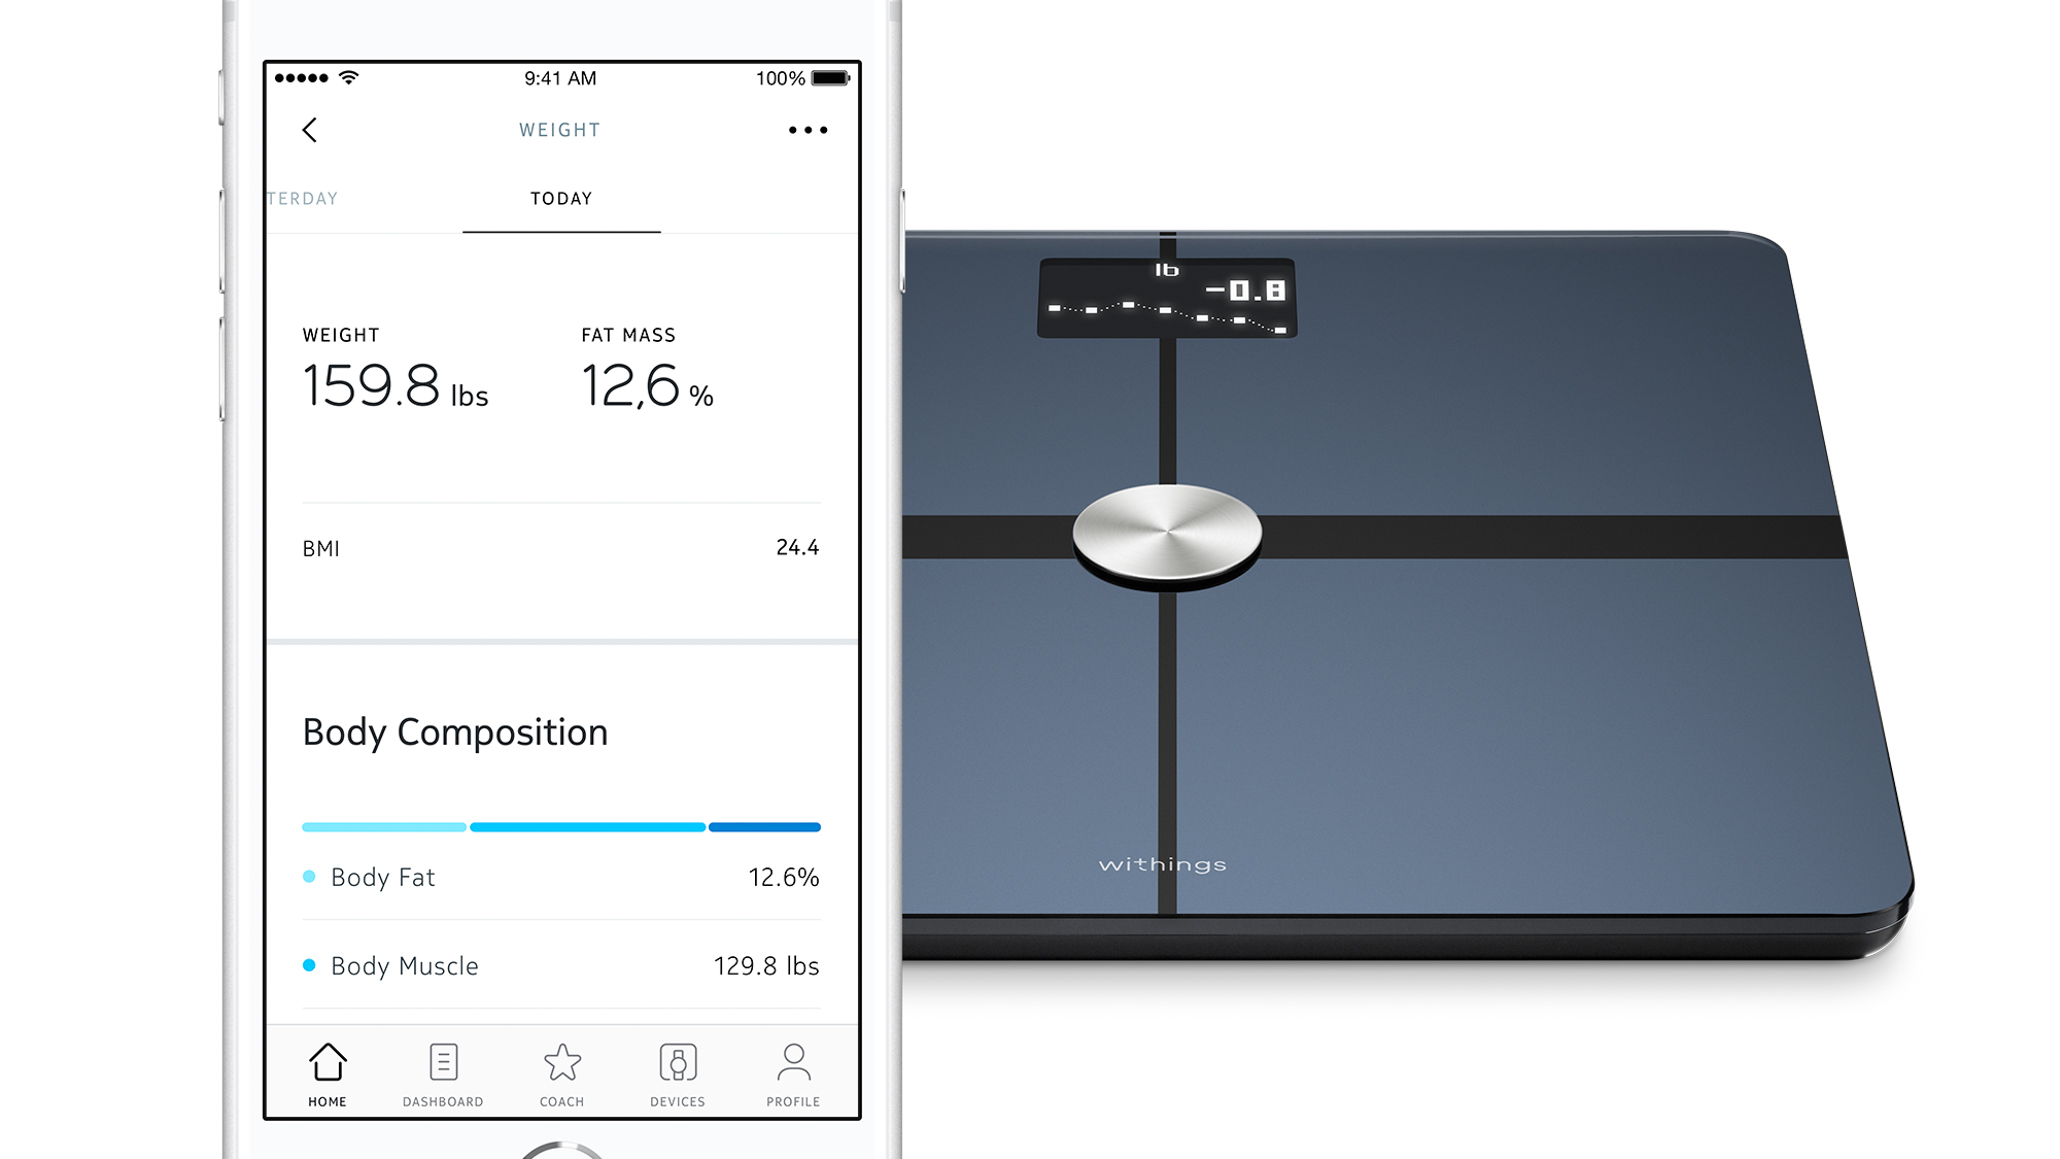 Delivering information on body composition and weight, the Withings Body+ scale connects o your smartphone via Wi-Fi, and can store metrics and configurations for up to 8 users. Image: Withings.